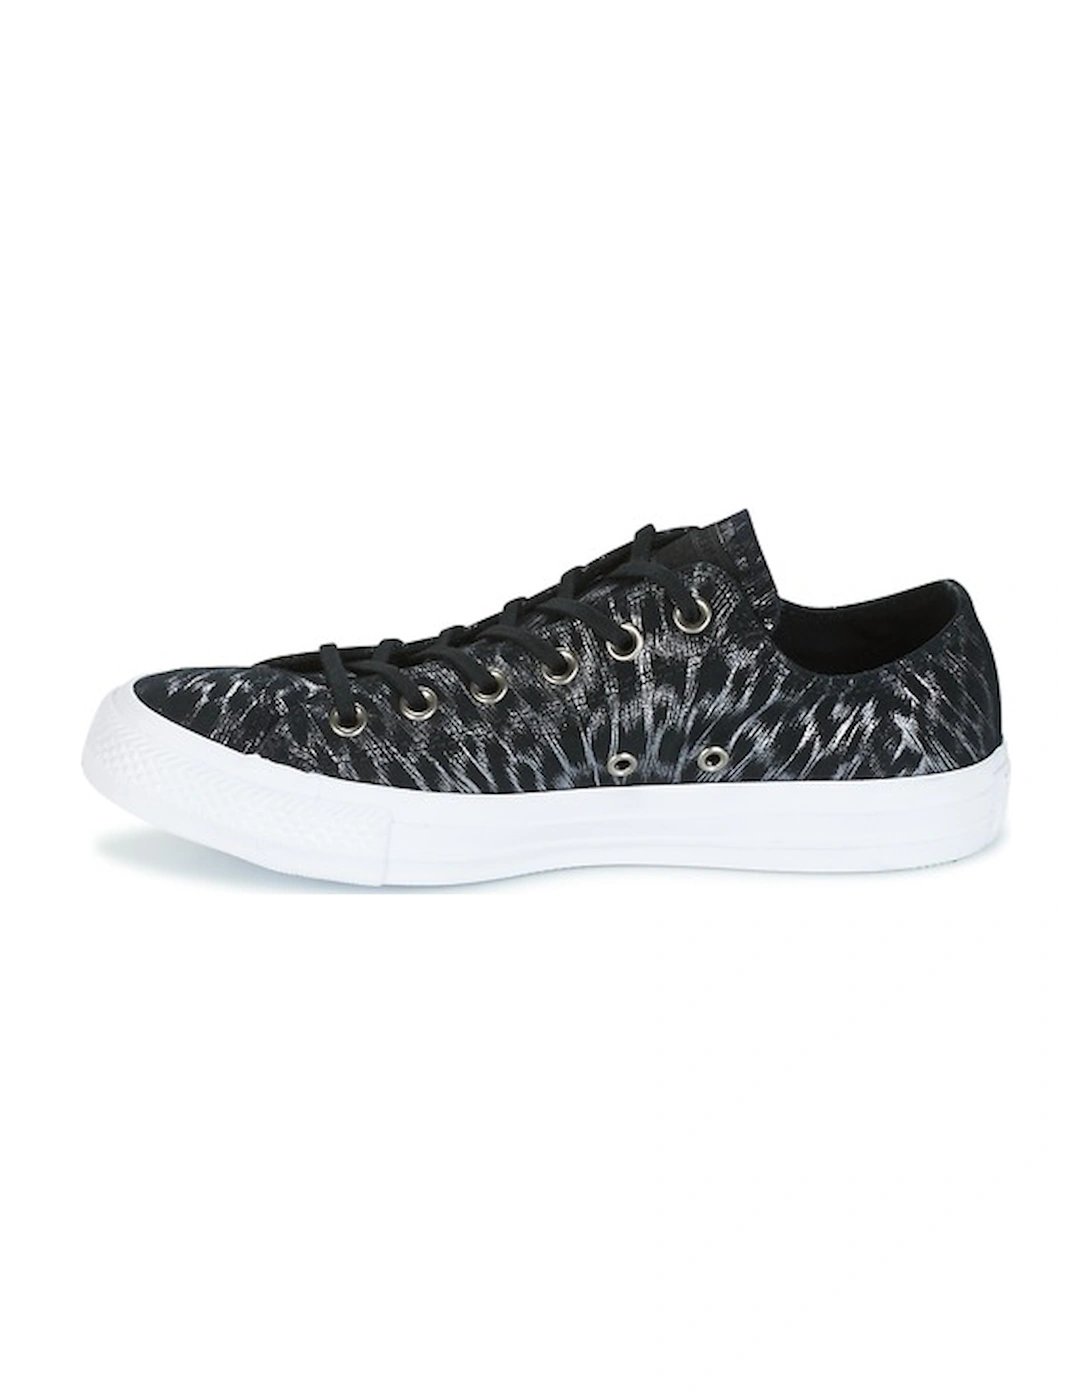 CHUCK TAYLOR ALL STAR SHIMMER SUEDE OX BLACK/BLACK/WHITE